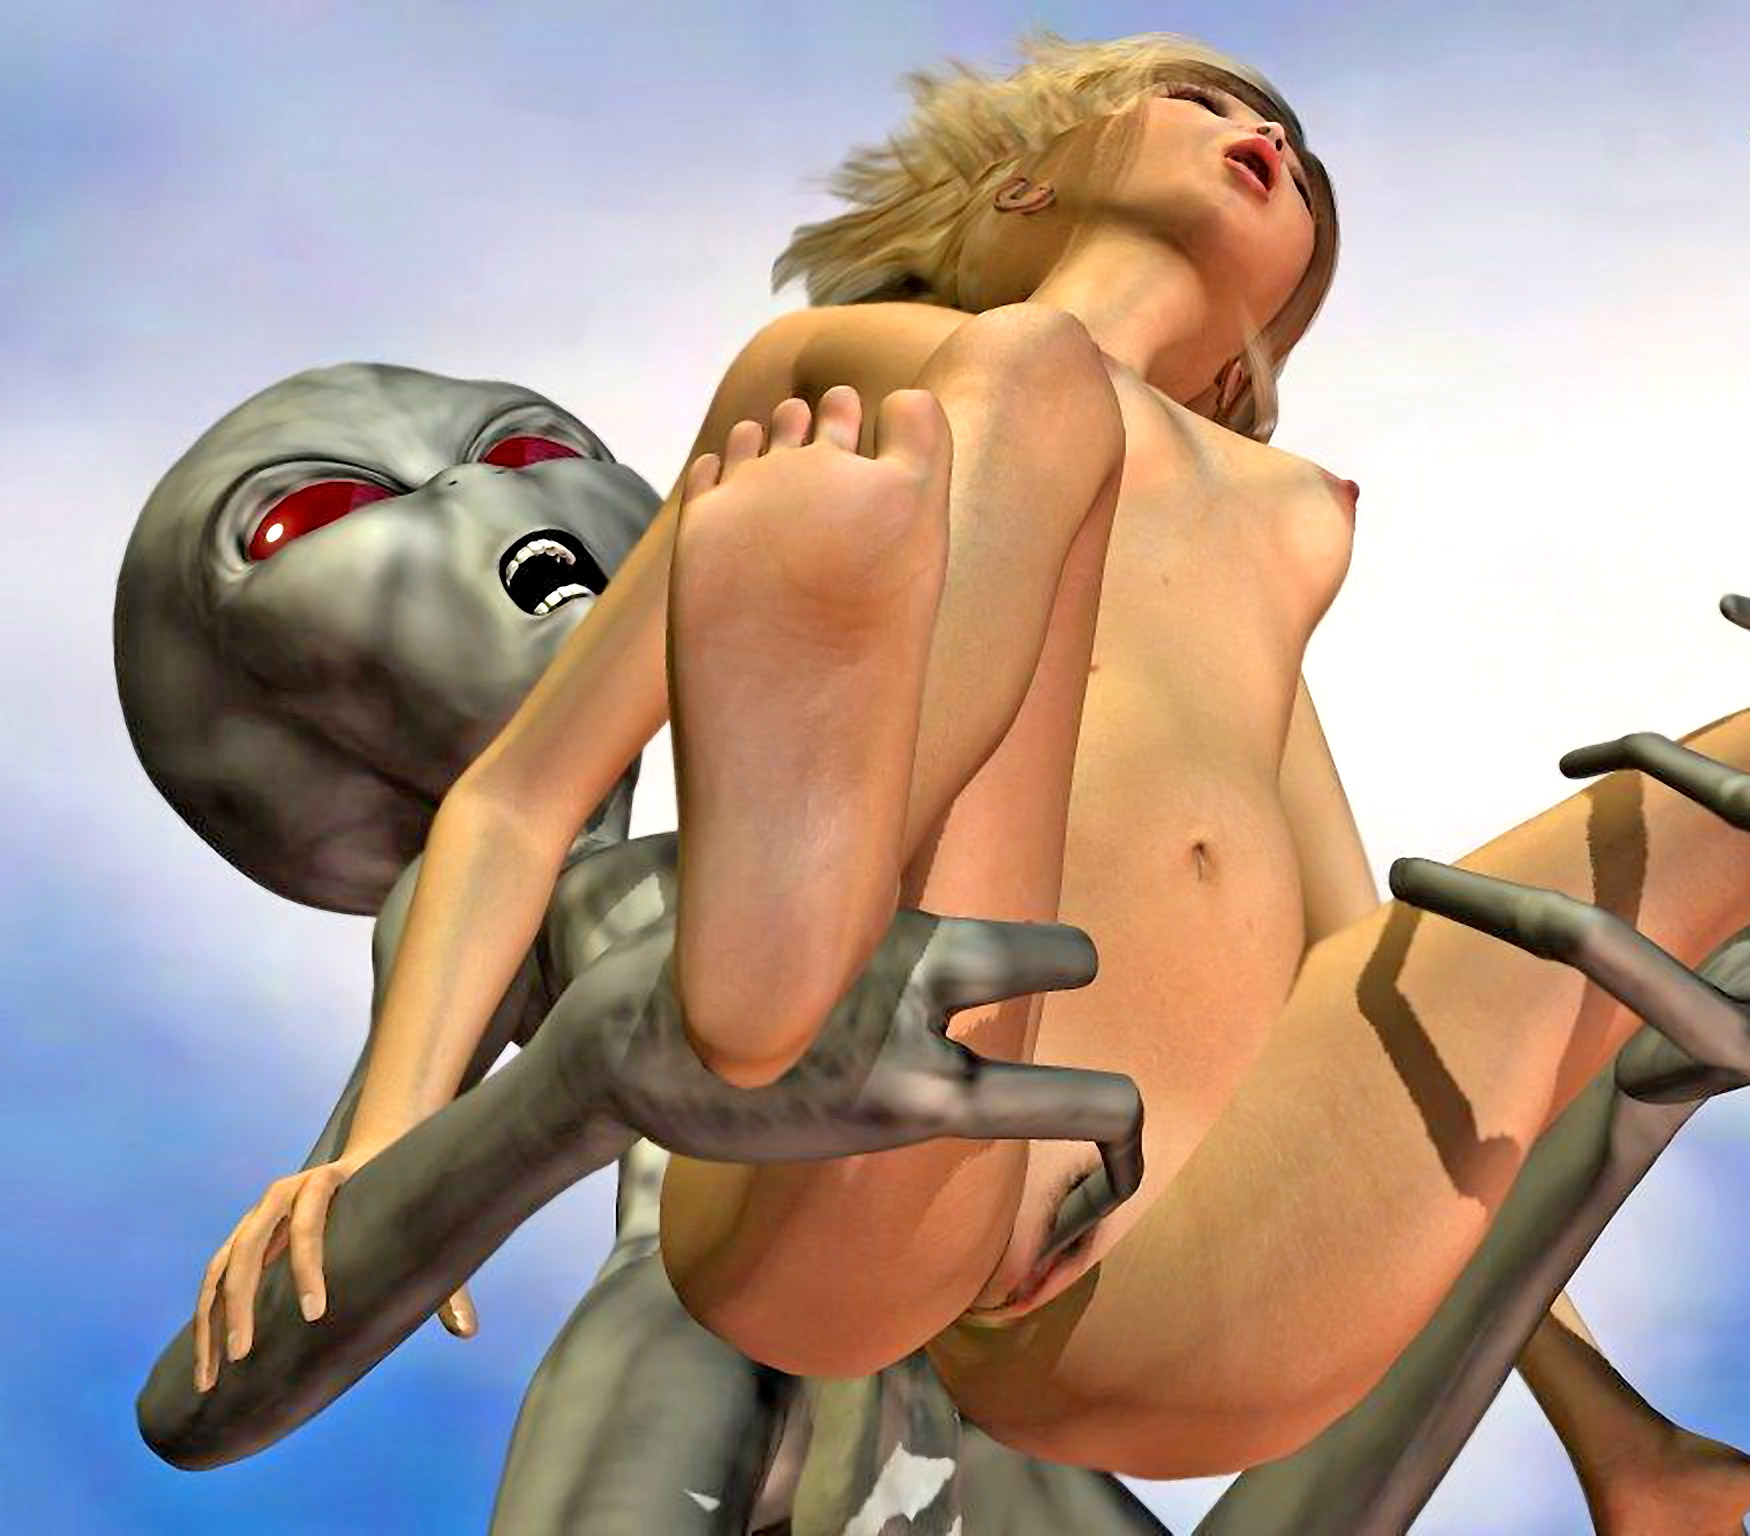 Robot And Monster Sex Cartoon - Amazing hd porn sex pic of human sluts fucked by terrifying demons. |  KingdomOfEvil 3d